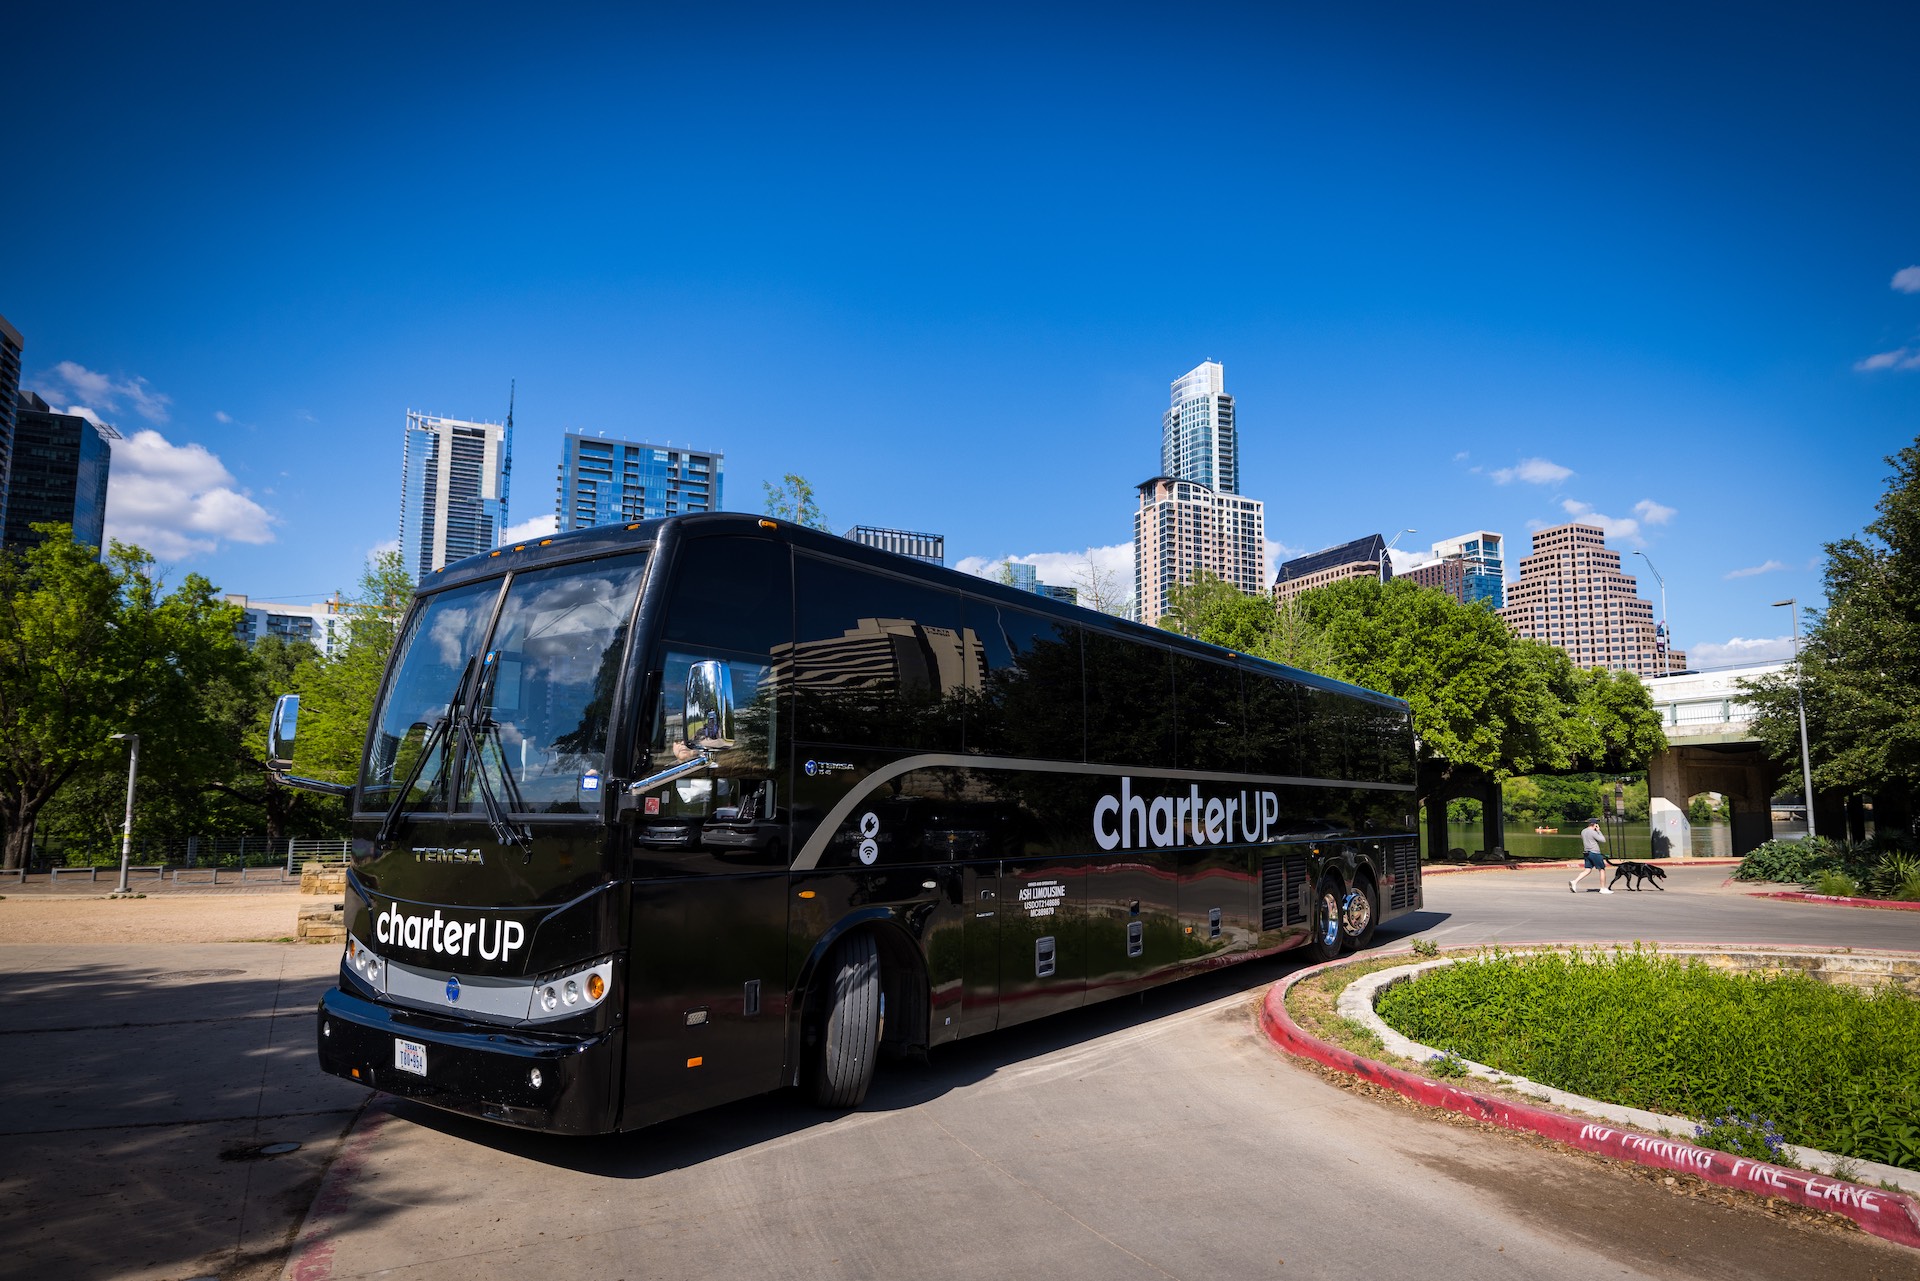 A black luxury coach with CharterUP branding parks in front of the Austin skyline